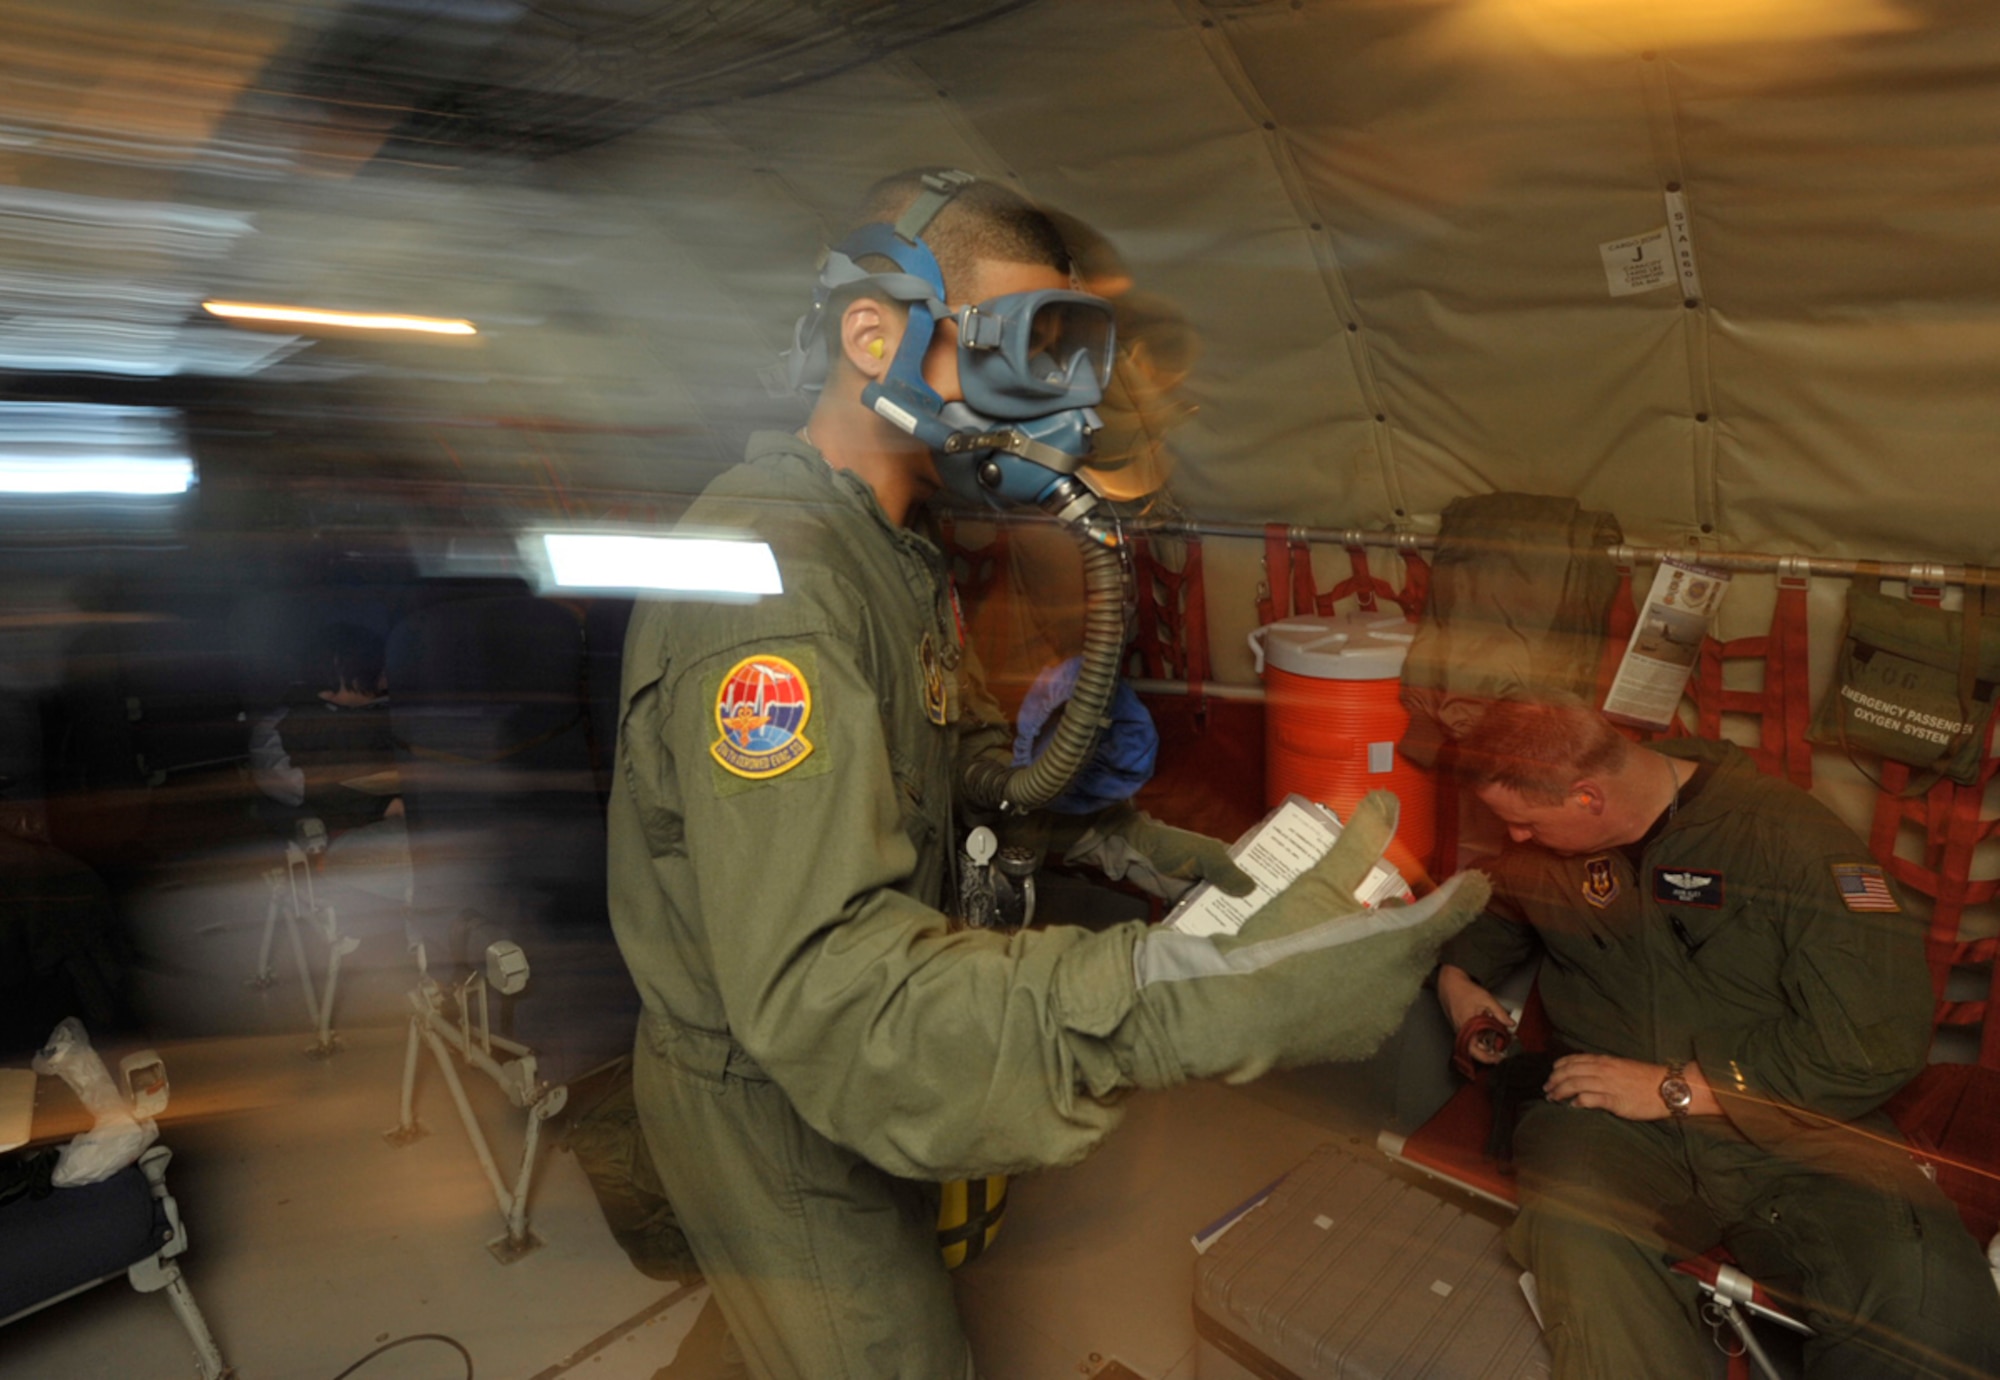 Senior Airman Elvin Paulino rushes to fight a simulated in-flight fire in the rear of a KC-135 Stratotanker Sunday. The simulation was part of a three-day aeromedical evacuation training mission using a KC-135 flown by Airmen from the 931st Air Refueling Group. Airman Paulino is assigned to the 514th Aeromedical Evacuation Squadron at McGuire Air Force Base, N.J. (U.S. Air Force photo/Tech Sgt. Jason Schaap)